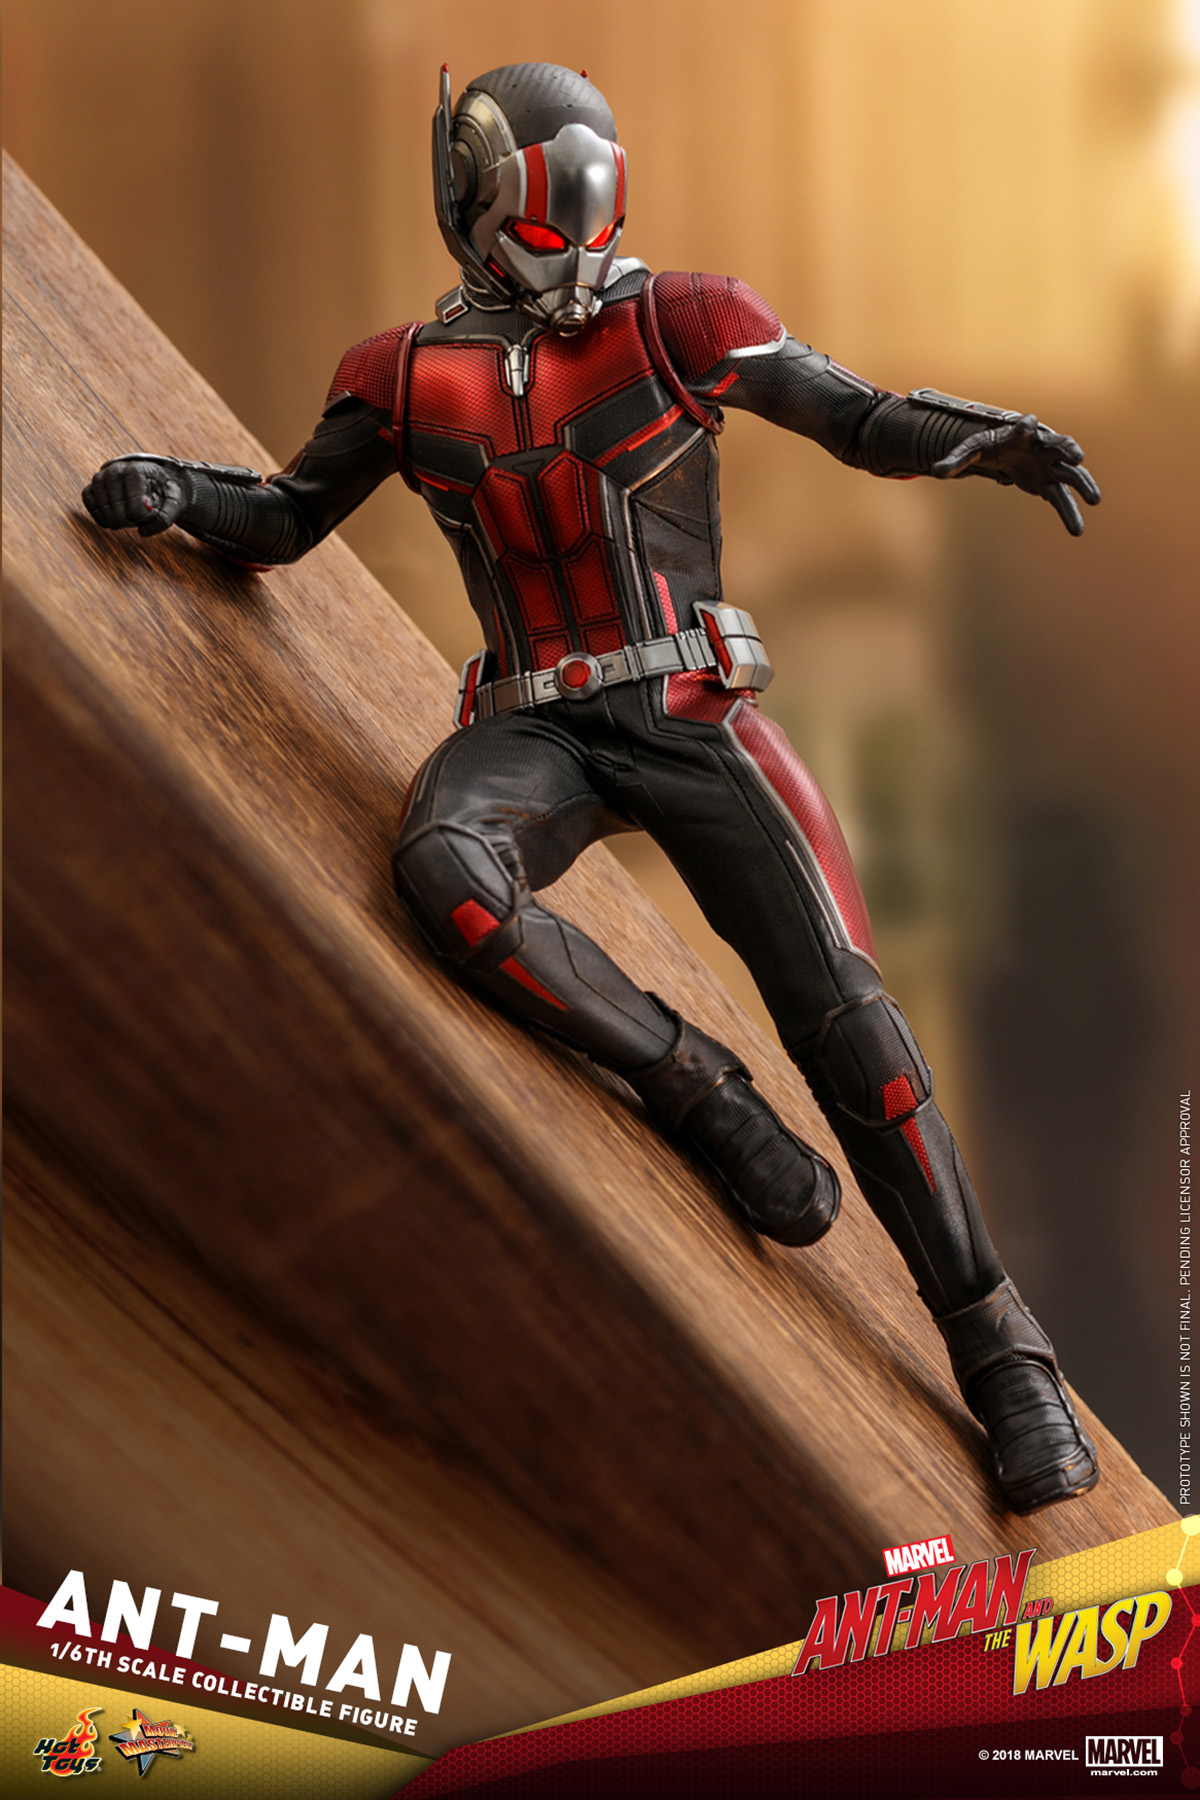 hot-toys-ant-man-and-the-wasp-ant-man-collectible-figure_pr8